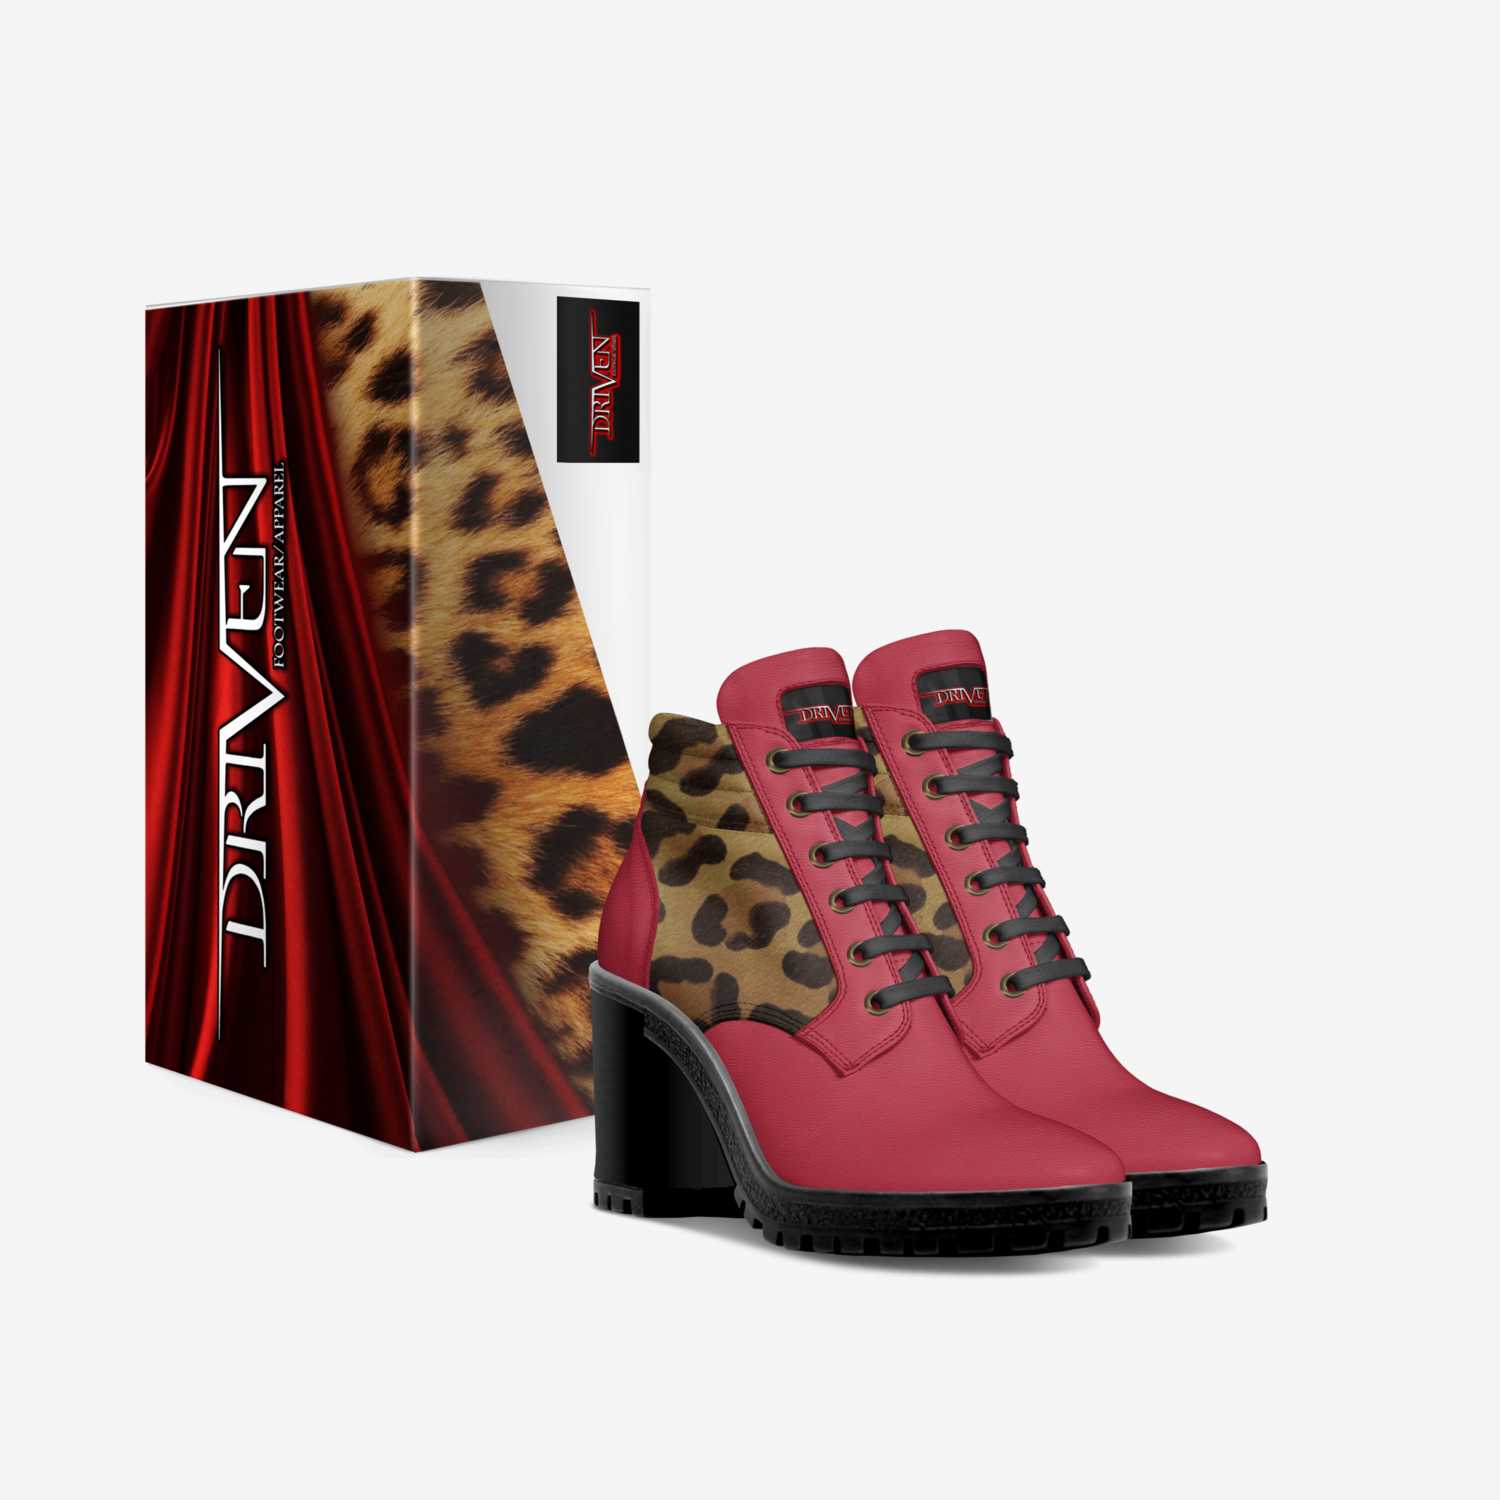 Driven  Huntress custom made in Italy shoes by Jason Oberly | Box view